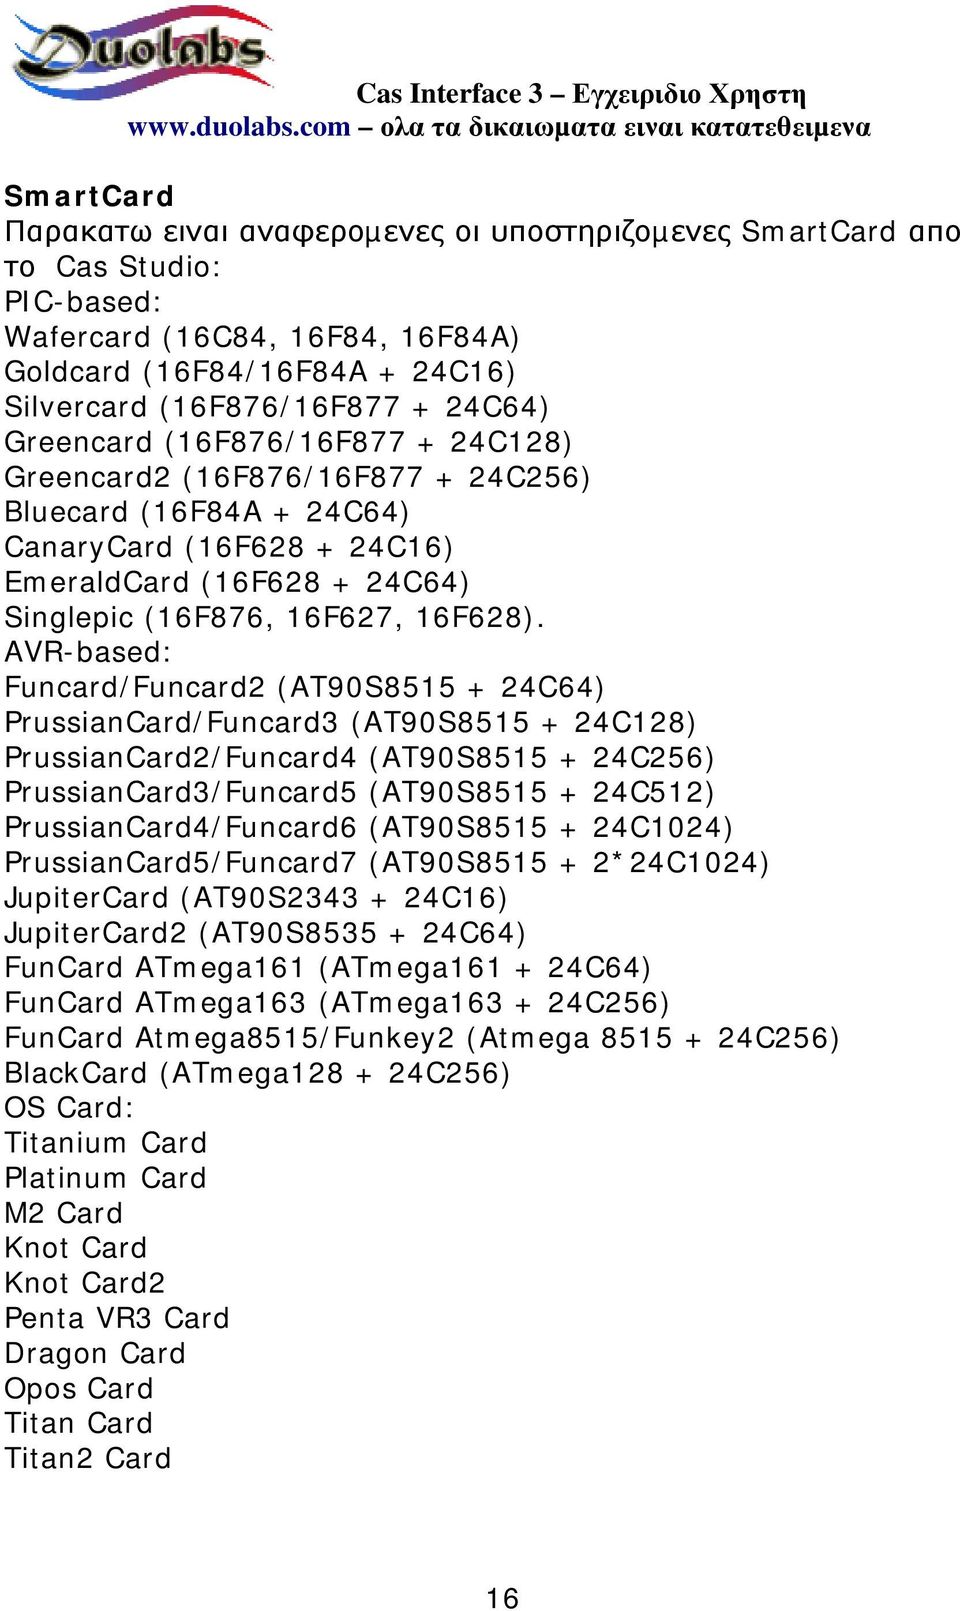 AVR-based: Funcard/Funcard2 (AT90S8515 + 24C64) PrussianCard/Funcard3 (AT90S8515 + 24C128) PrussianCard2/Funcard4 (AT90S8515 + 24C256) PrussianCard3/Funcard5 (AT90S8515 + 24C512)